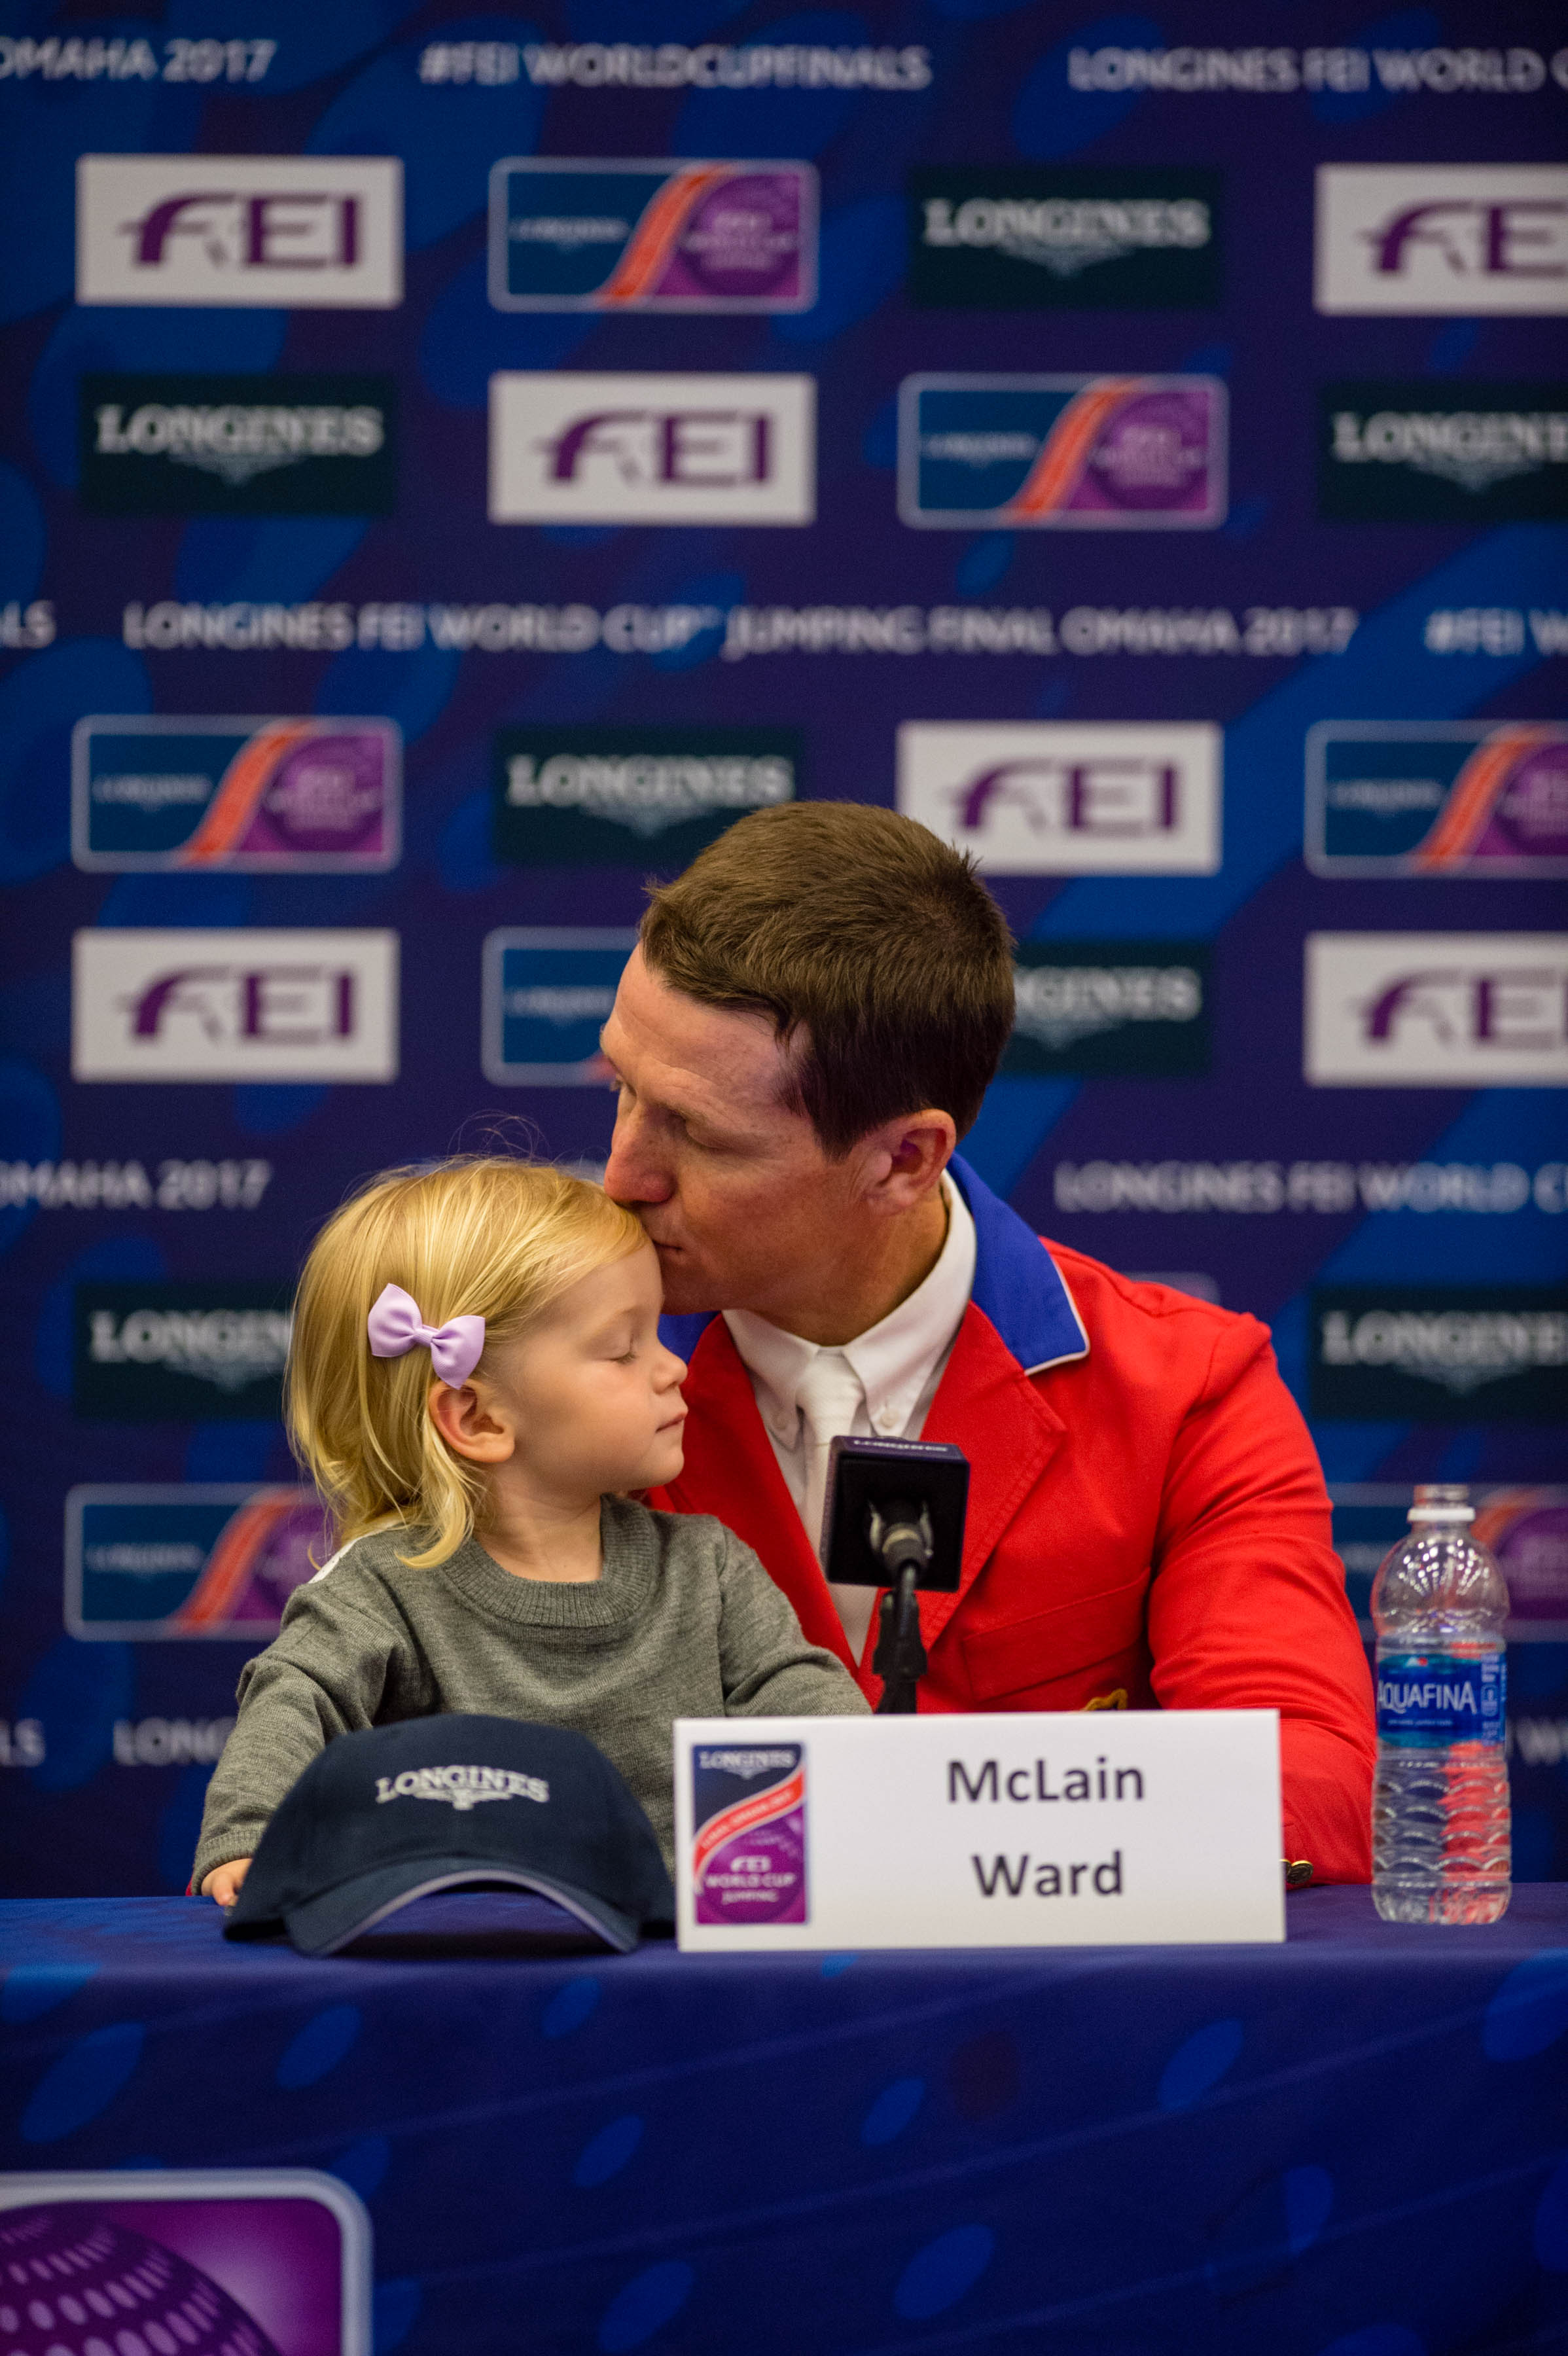  McLain Ward shares a quiet moment with his daughter Lilly during a press conference at the World Cup Finals in Omaha. 